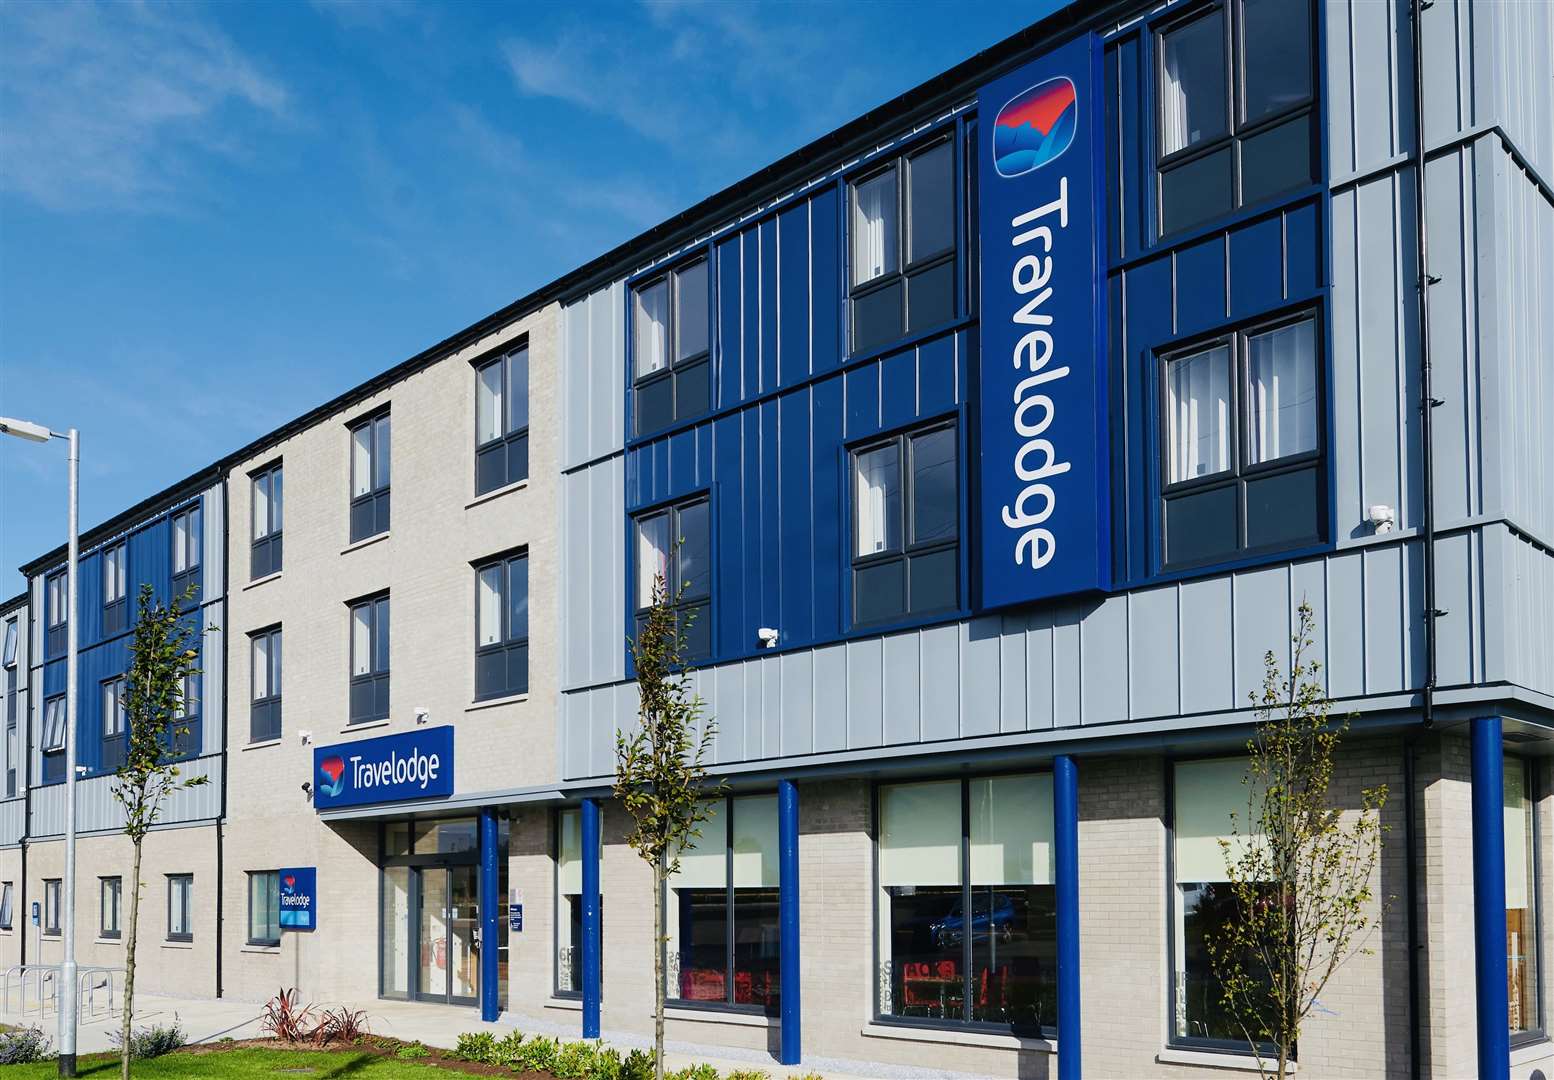 Elgin Travelodge, at Elgin Gateway Business Park off the A96.